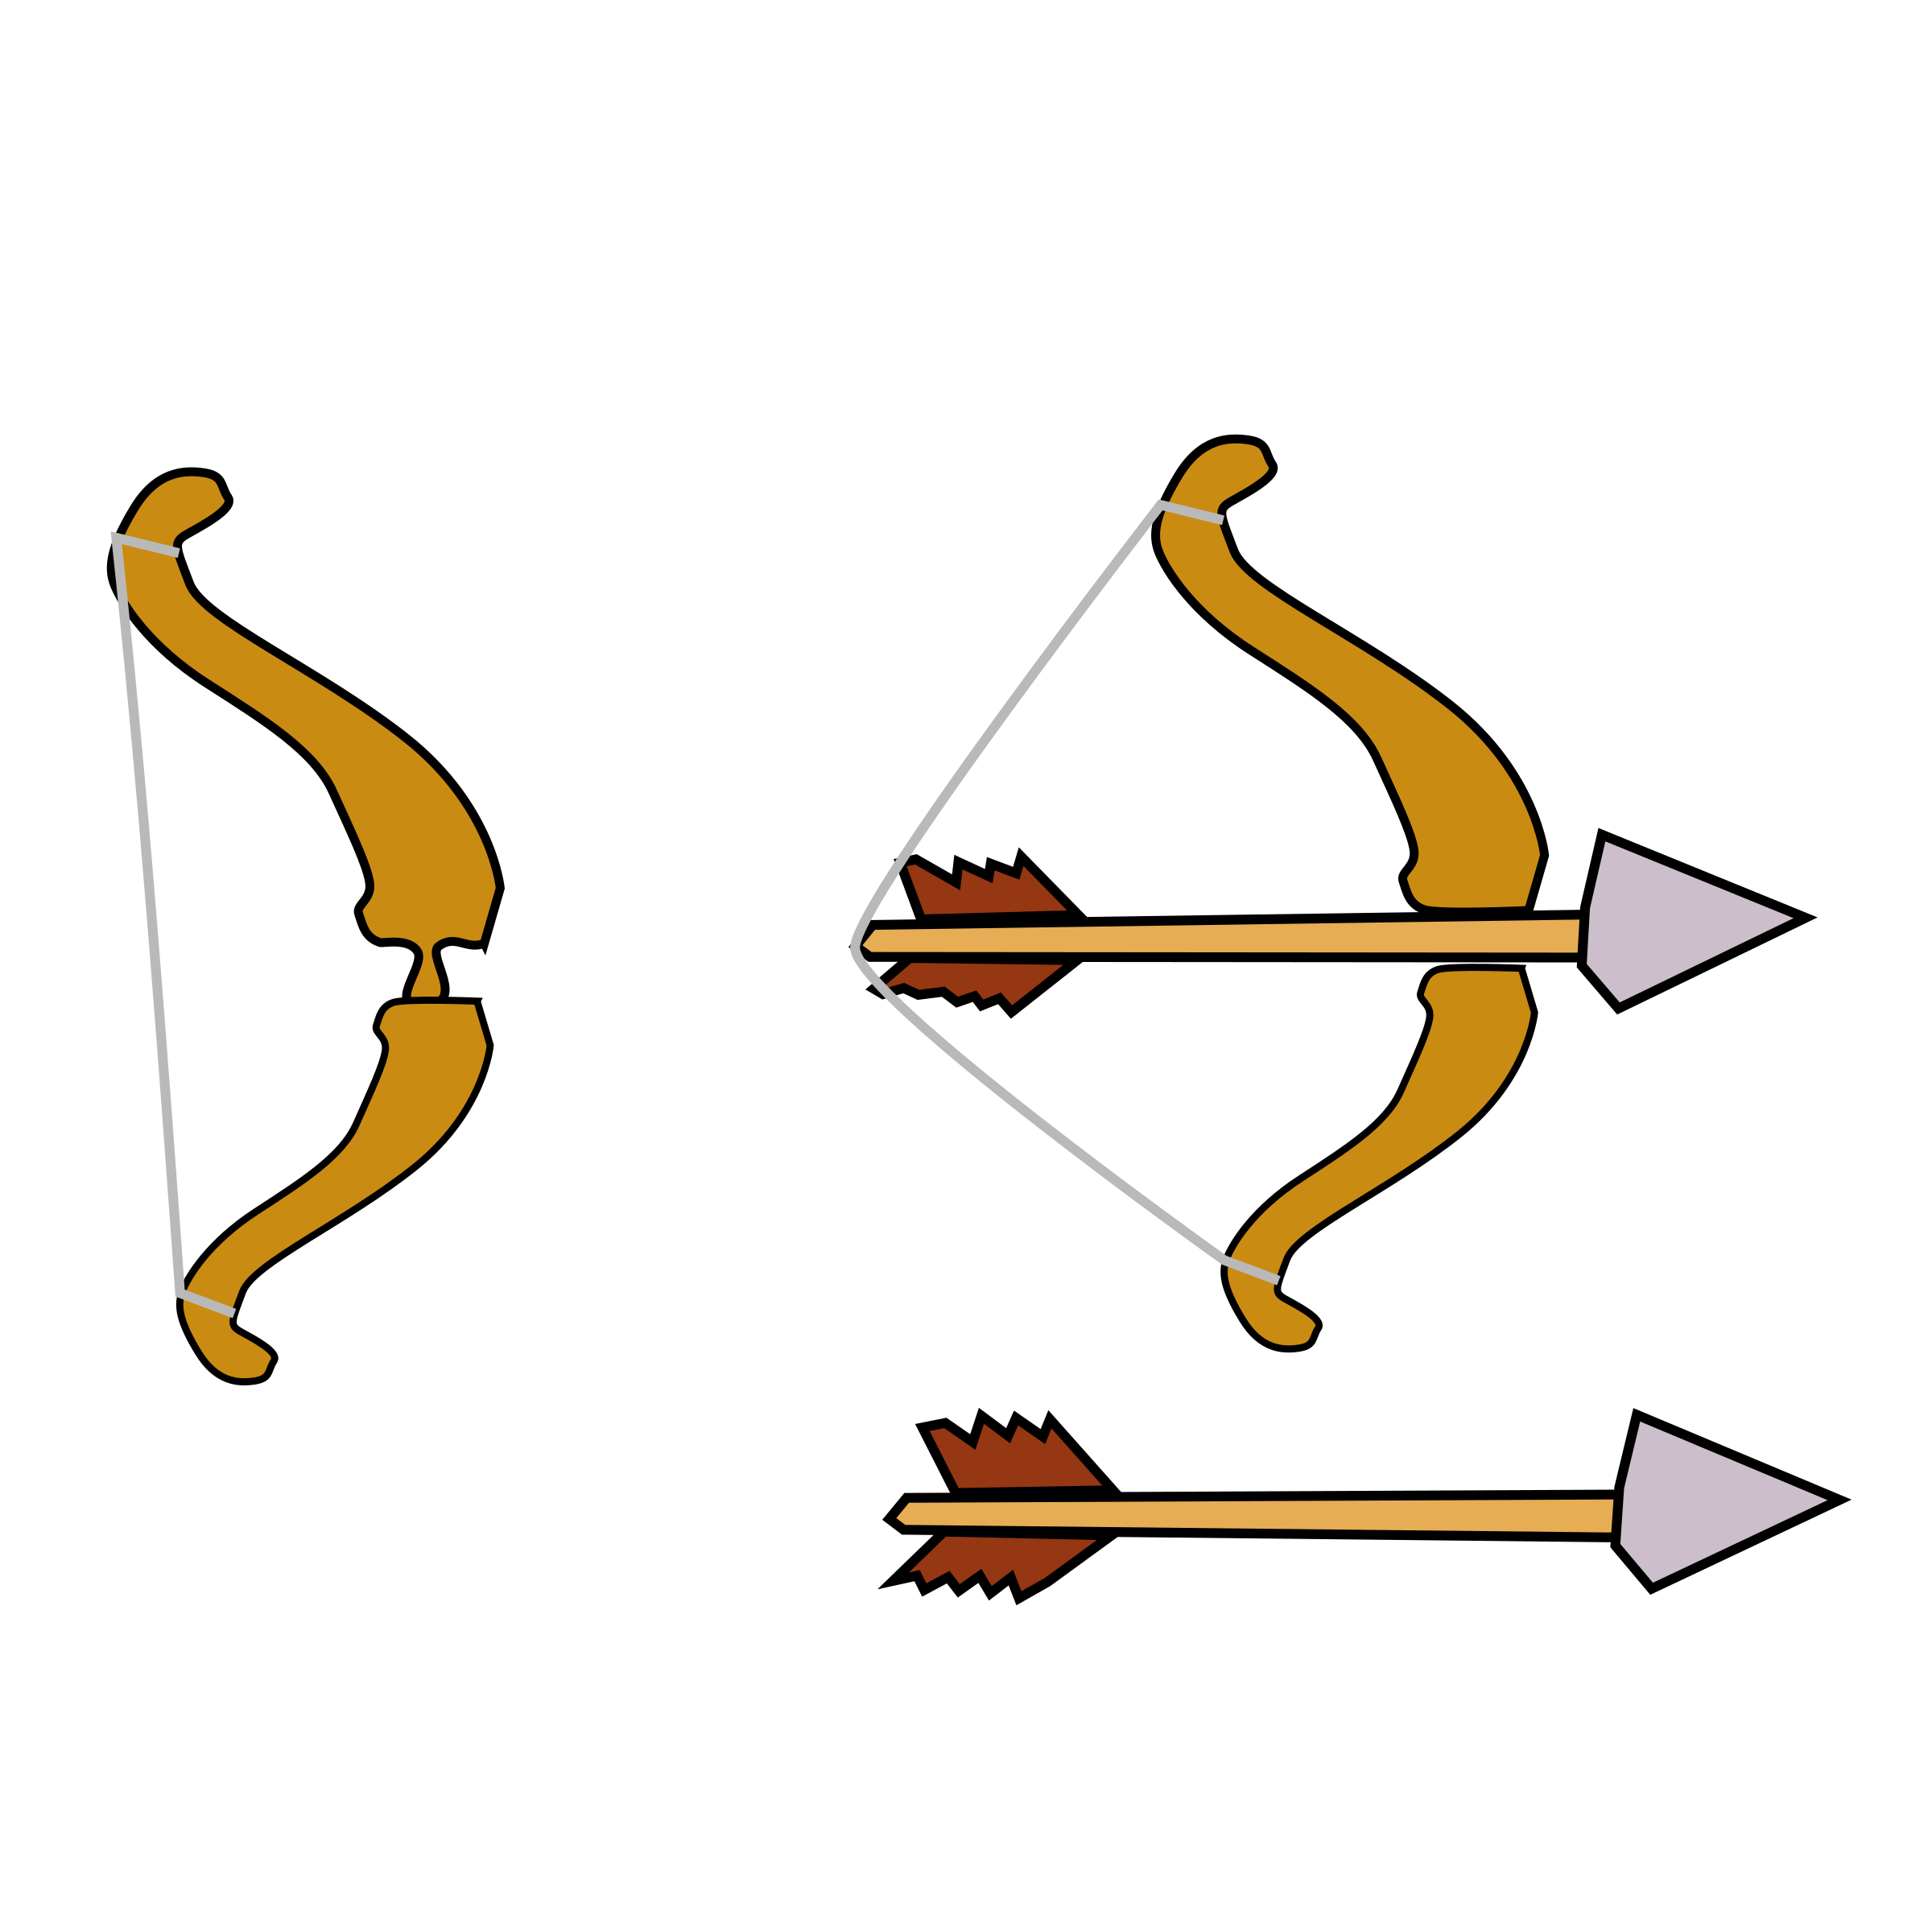 Bow and arrow png. Archery clipart archery game